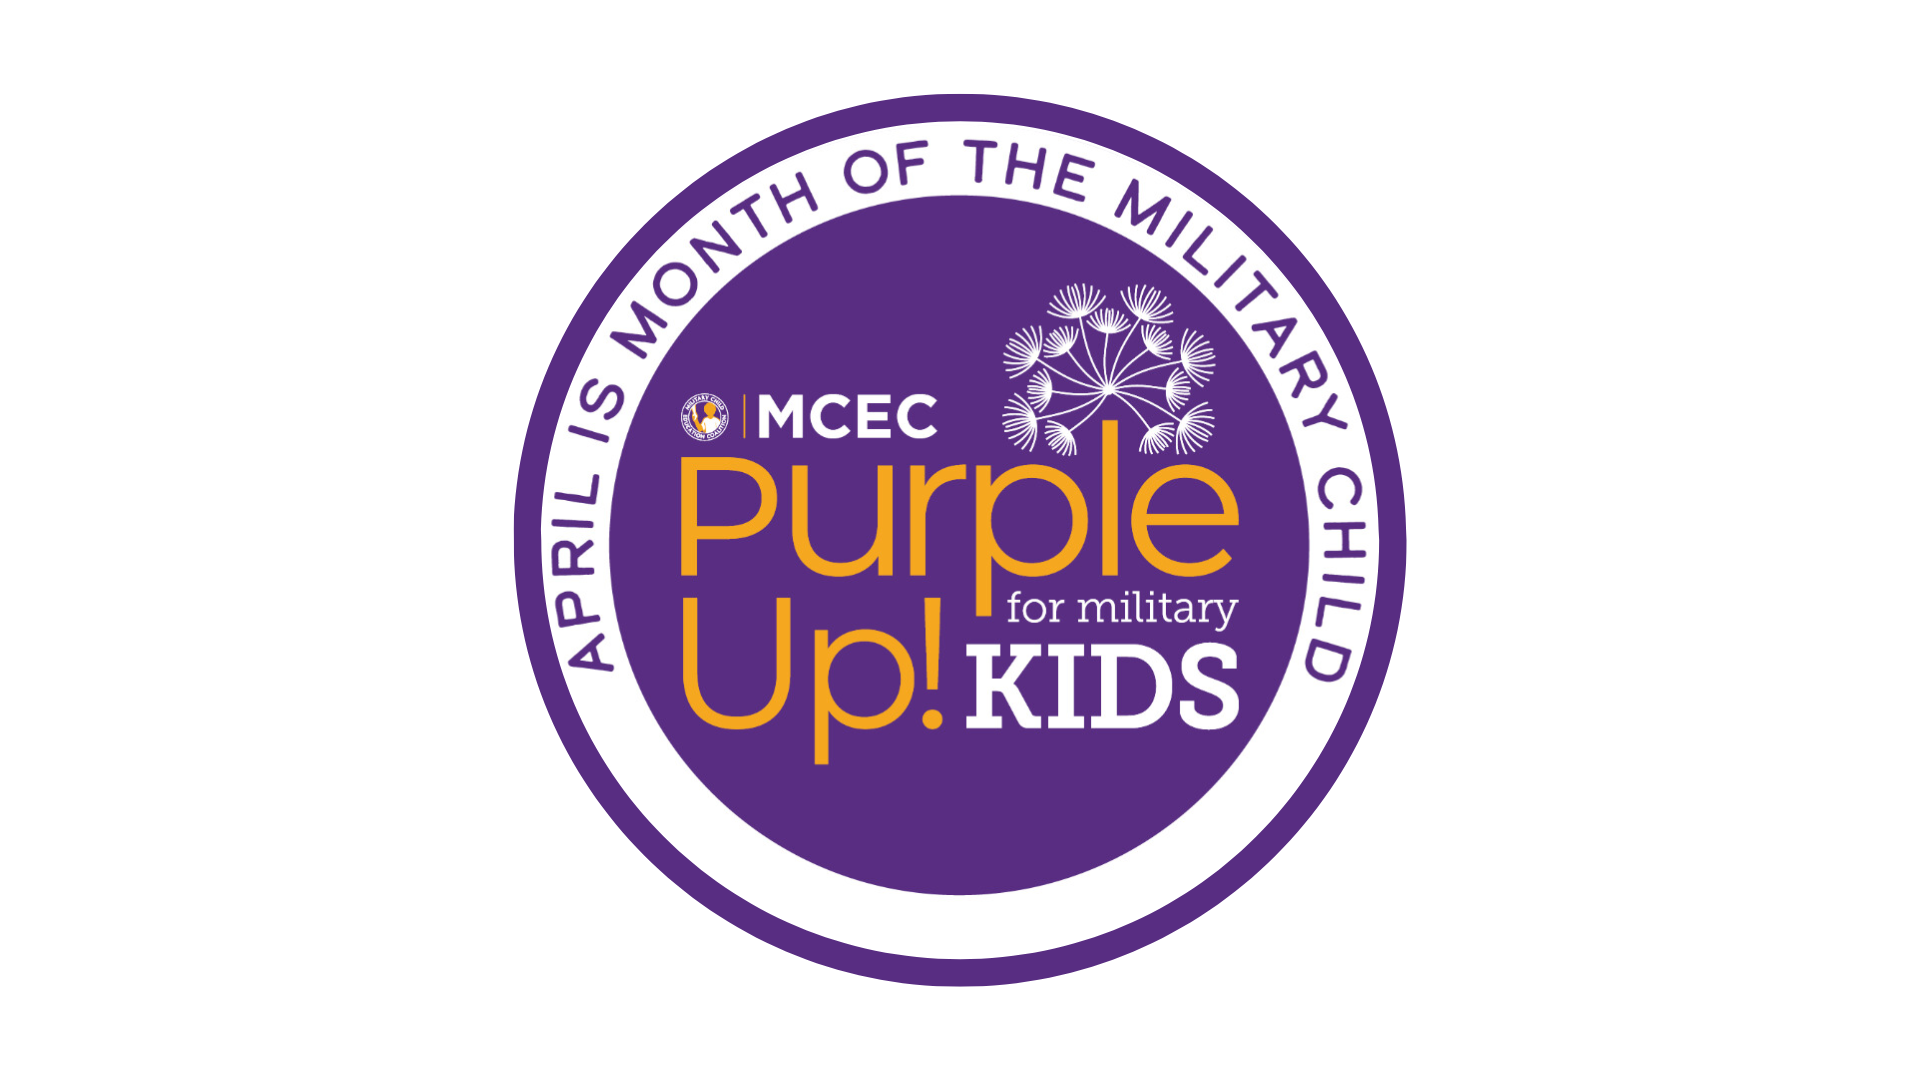 Purple Up for military kids